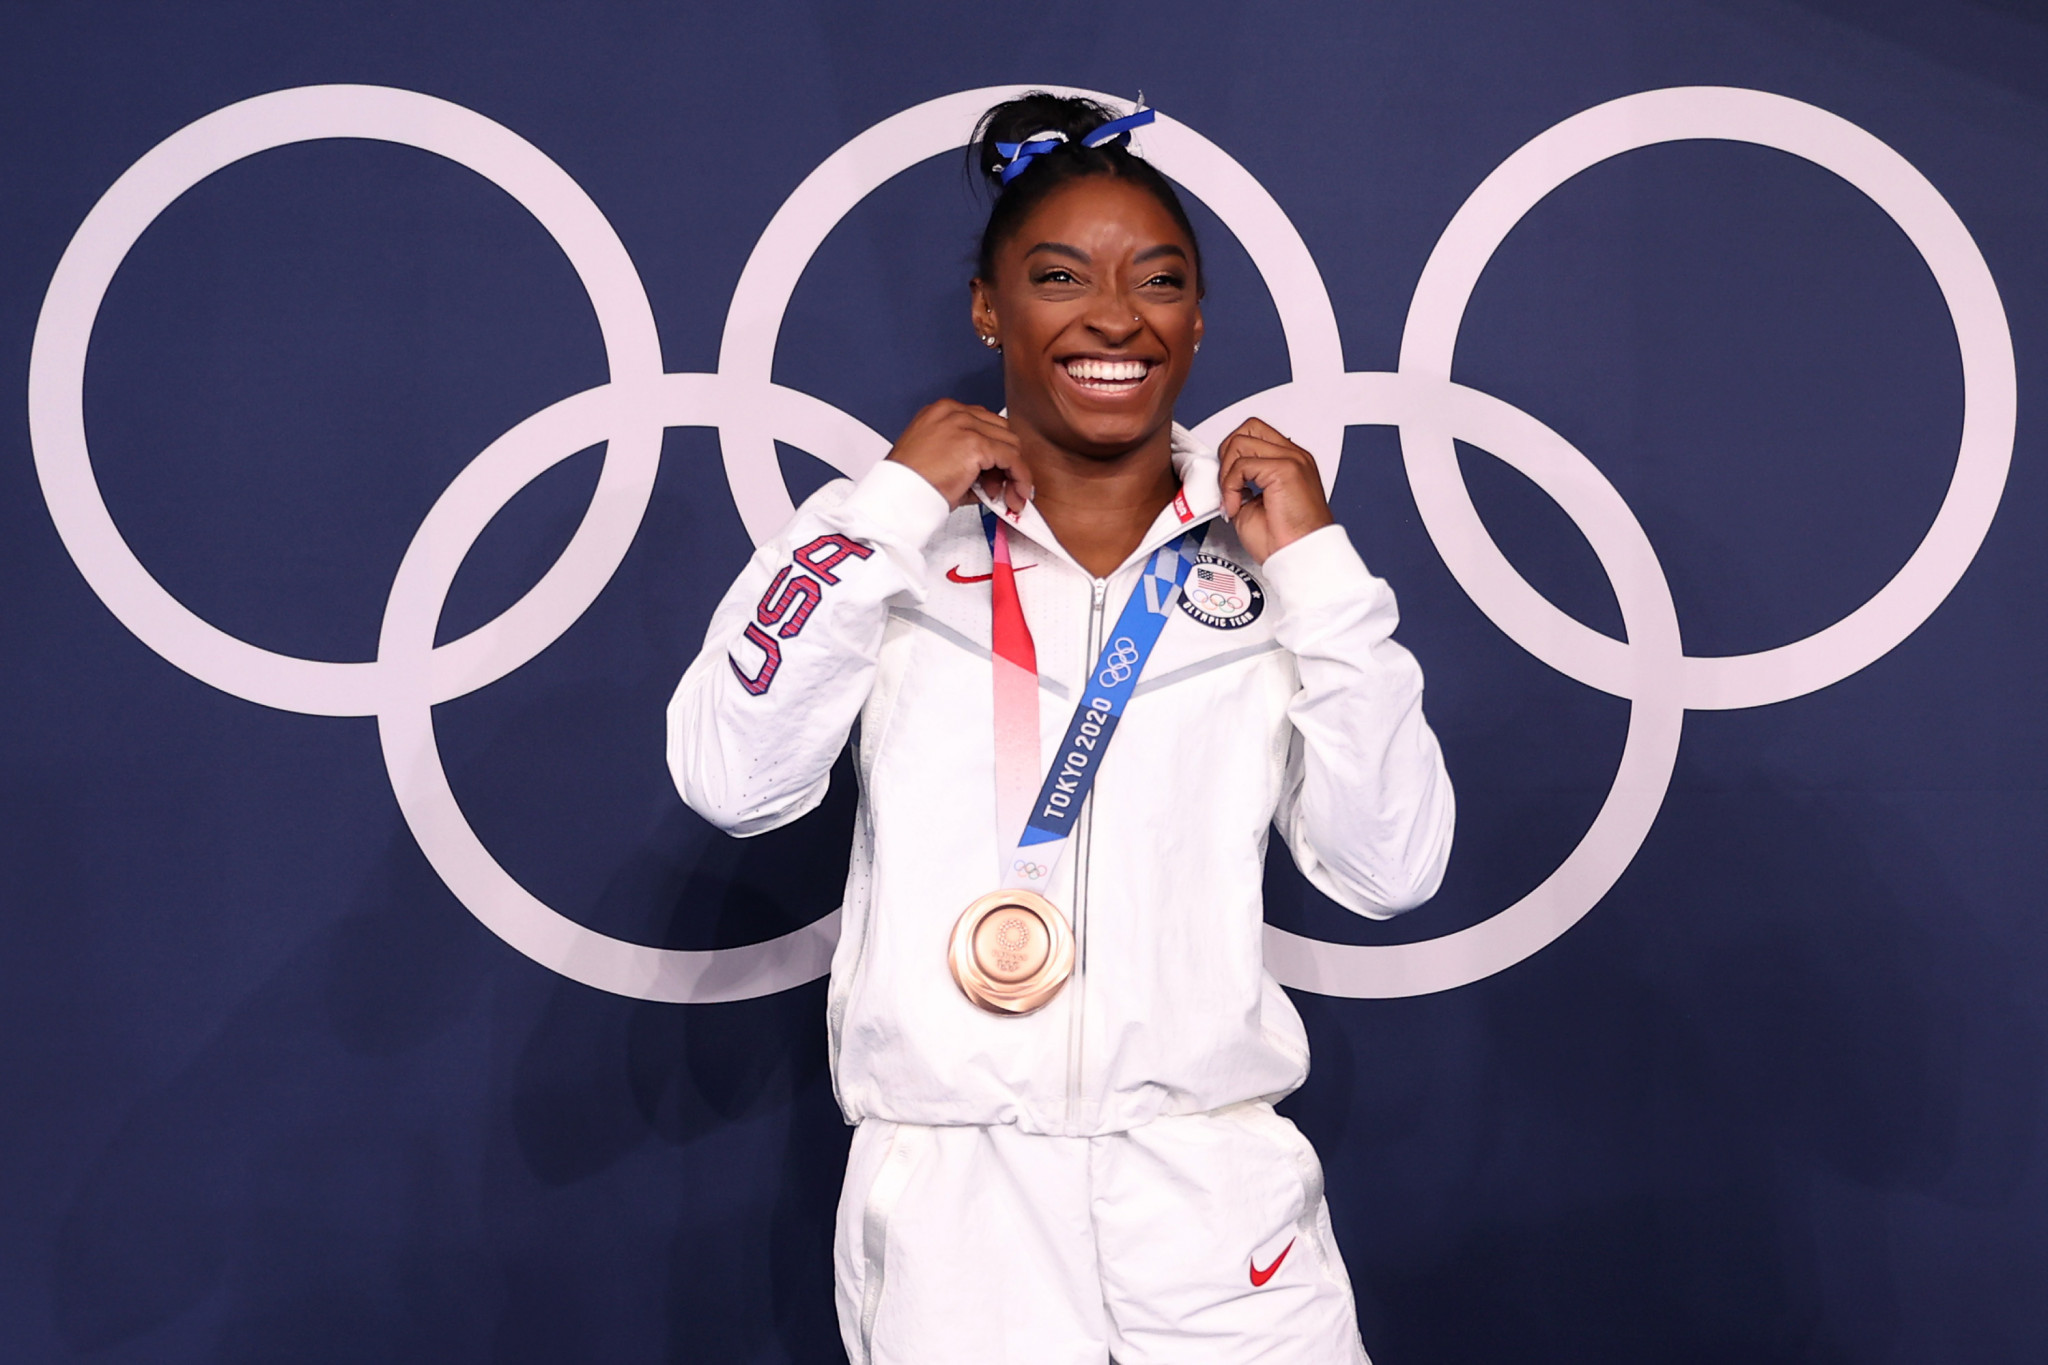 Biles confirms for first time that goal is to compete at Paris 2024